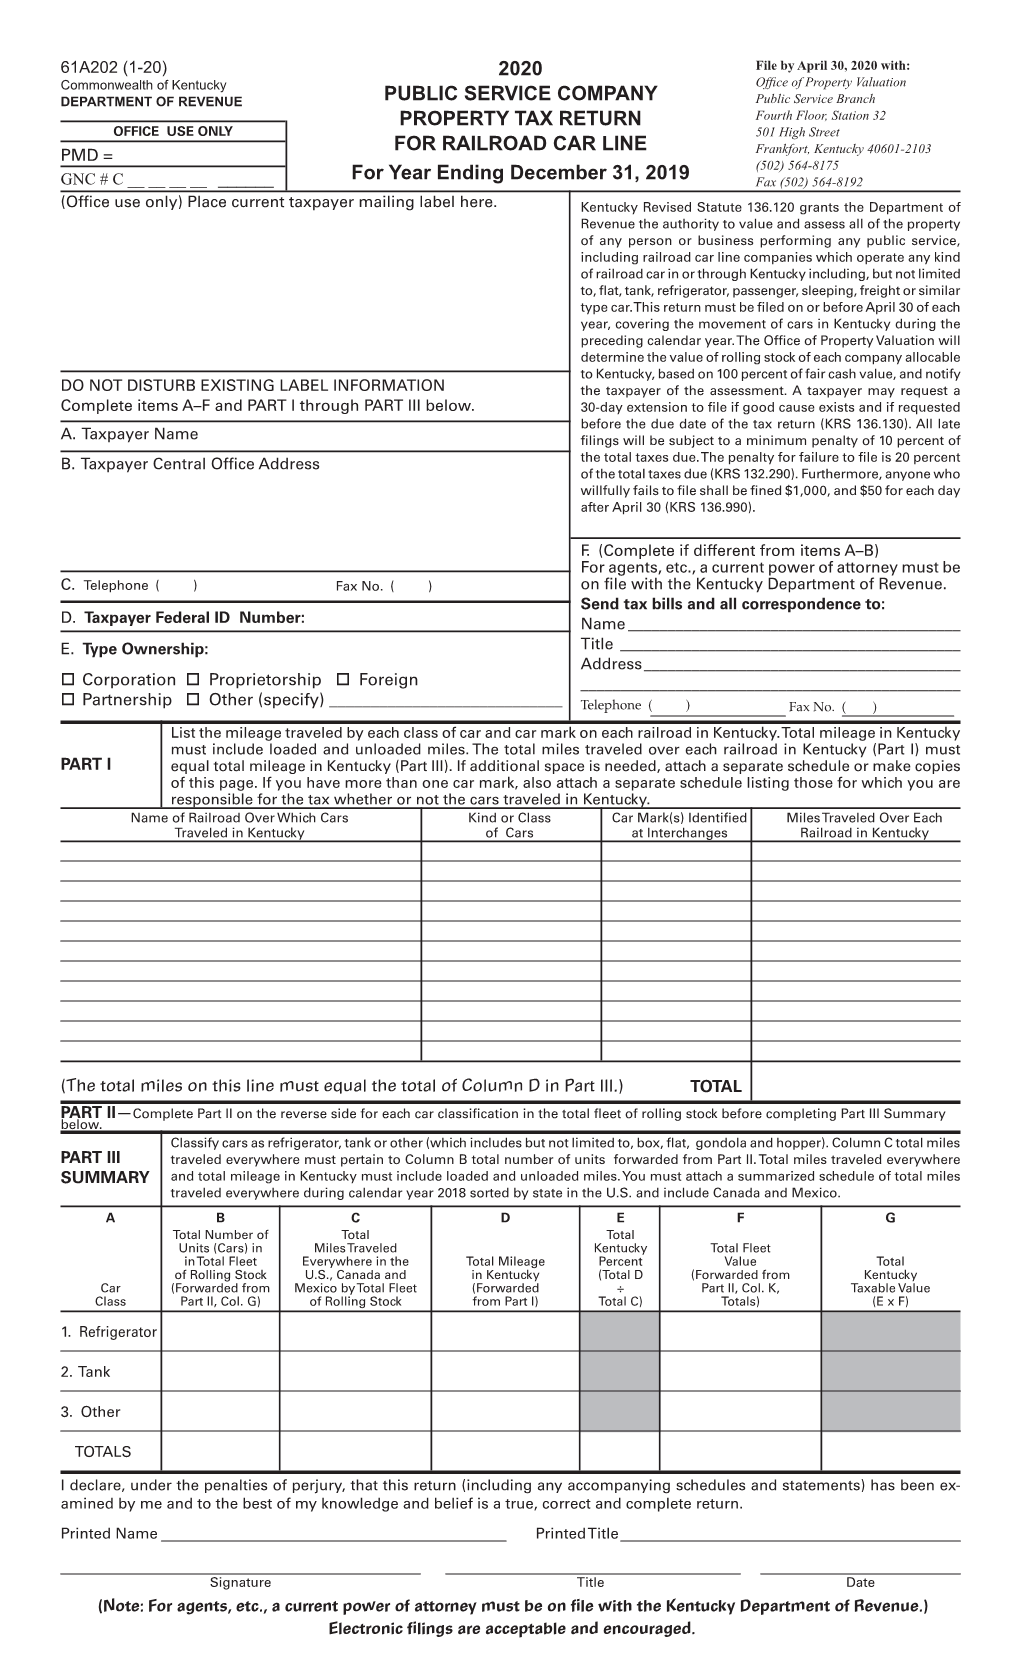 2020 Public Service Company Property Tax Return For